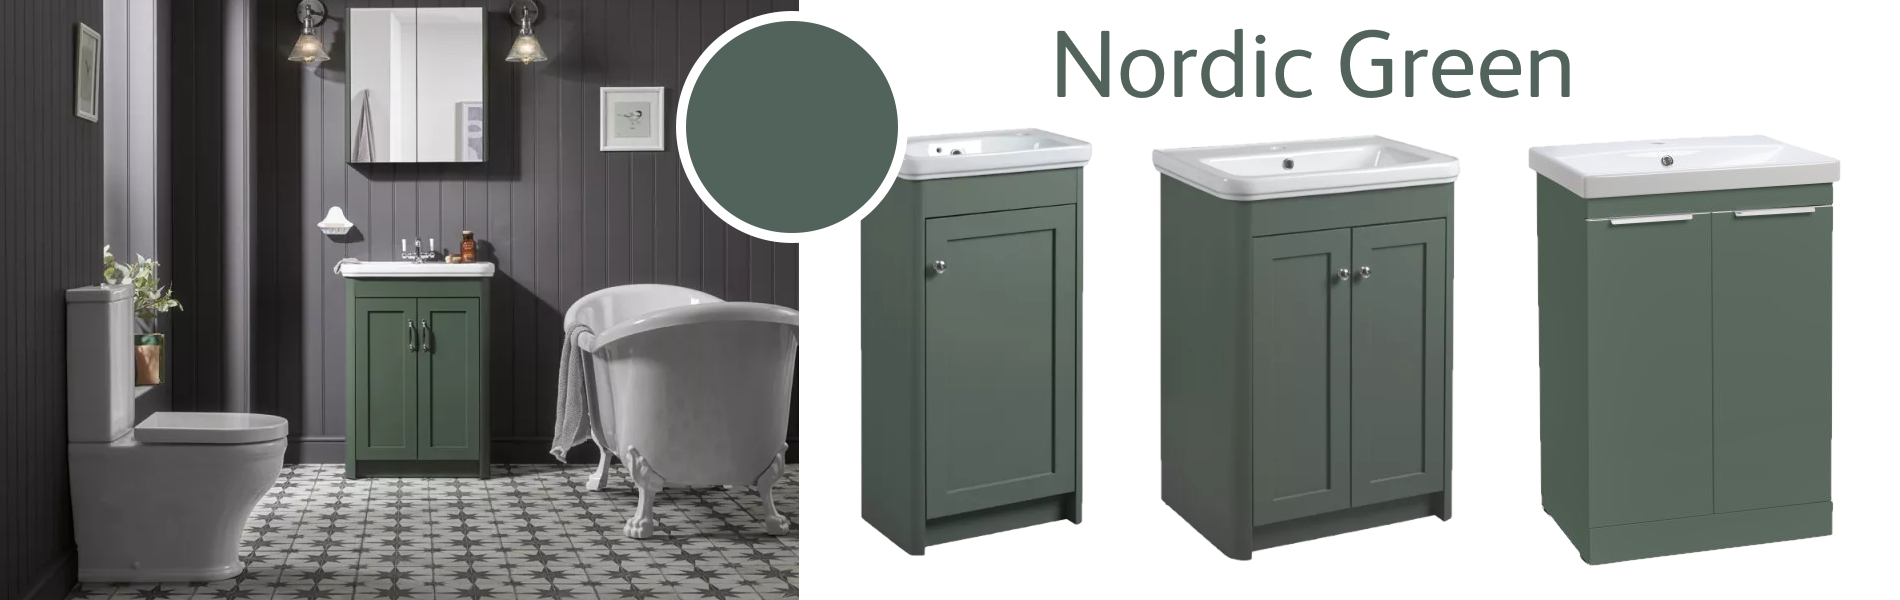 Nordic Green bathroom cabinets from Roper Rhodes